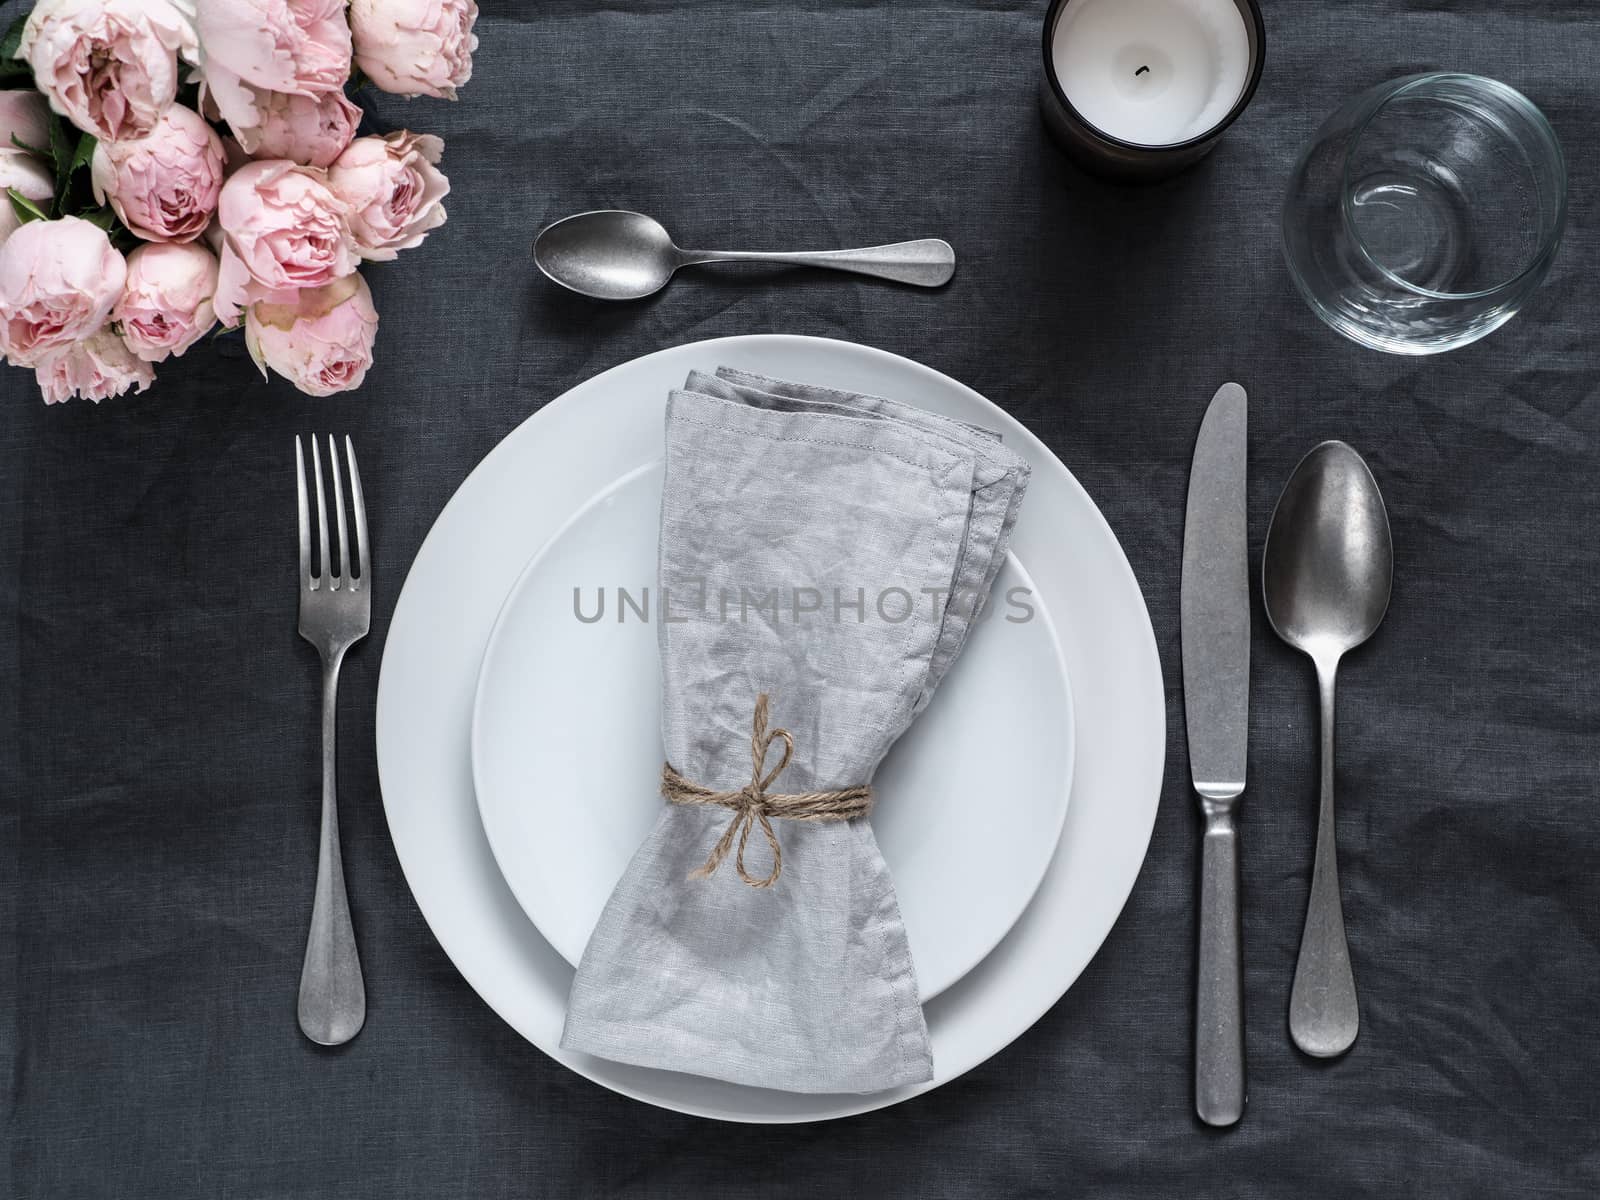 Beautiful table setting with pink spray roses and candle on gray linen tablecloth. Festive table setting for wedding dinner with gray linen napkin on plate. Holiday dinner at home, with white plates